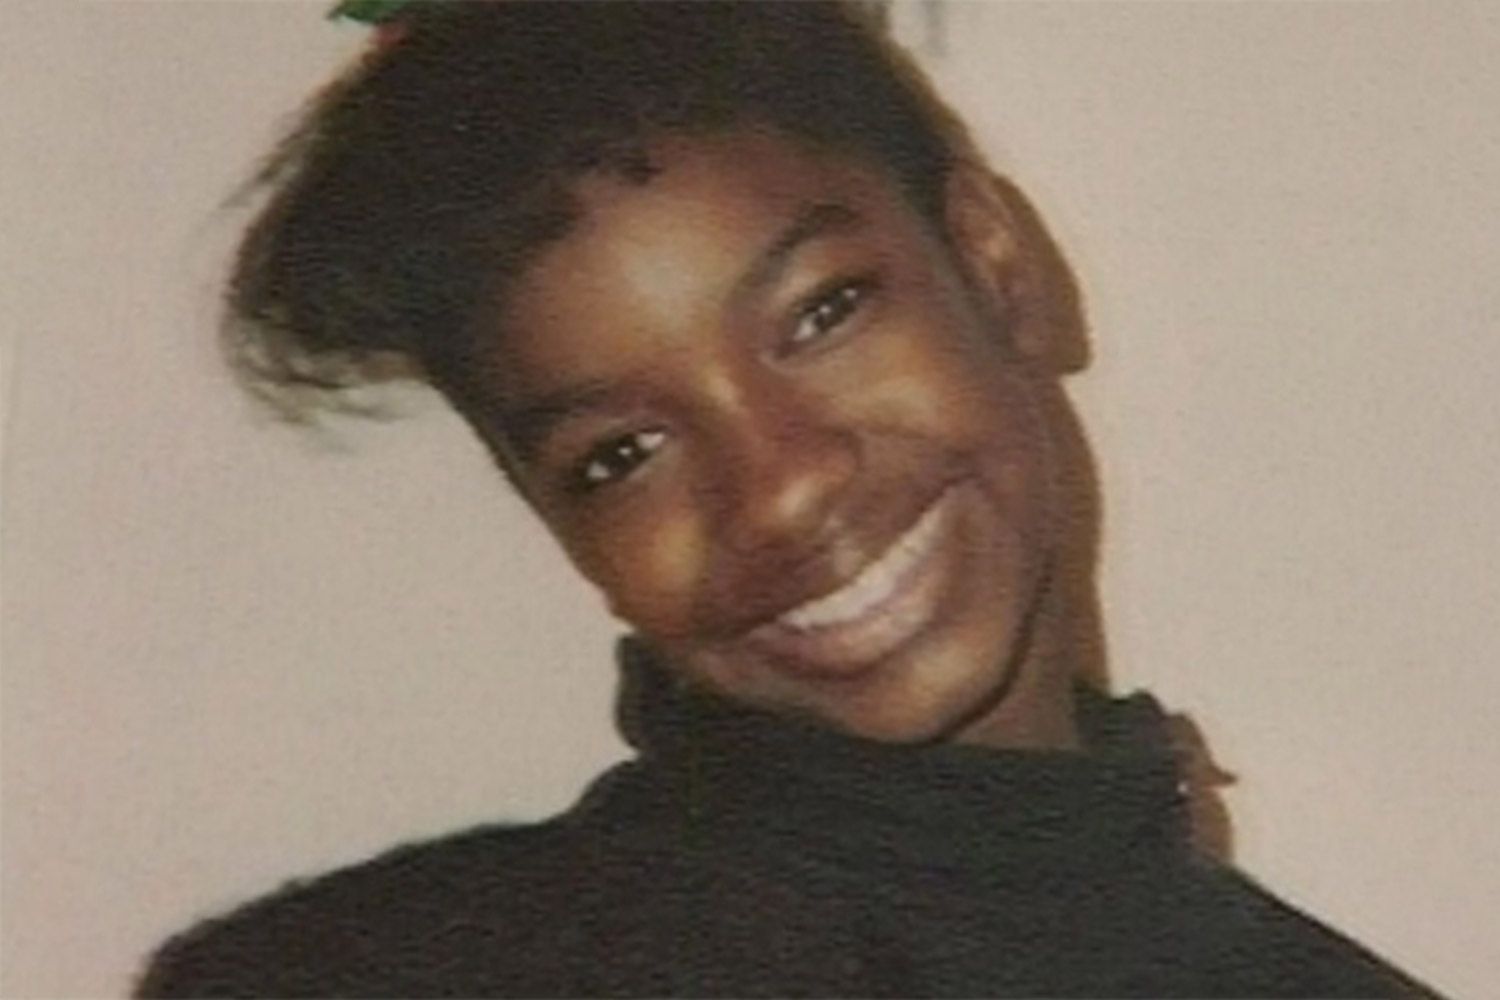 Atlanta Police Identify Suspect in 1995 Rape and Murder of 14-Year-Old Nacole Smith